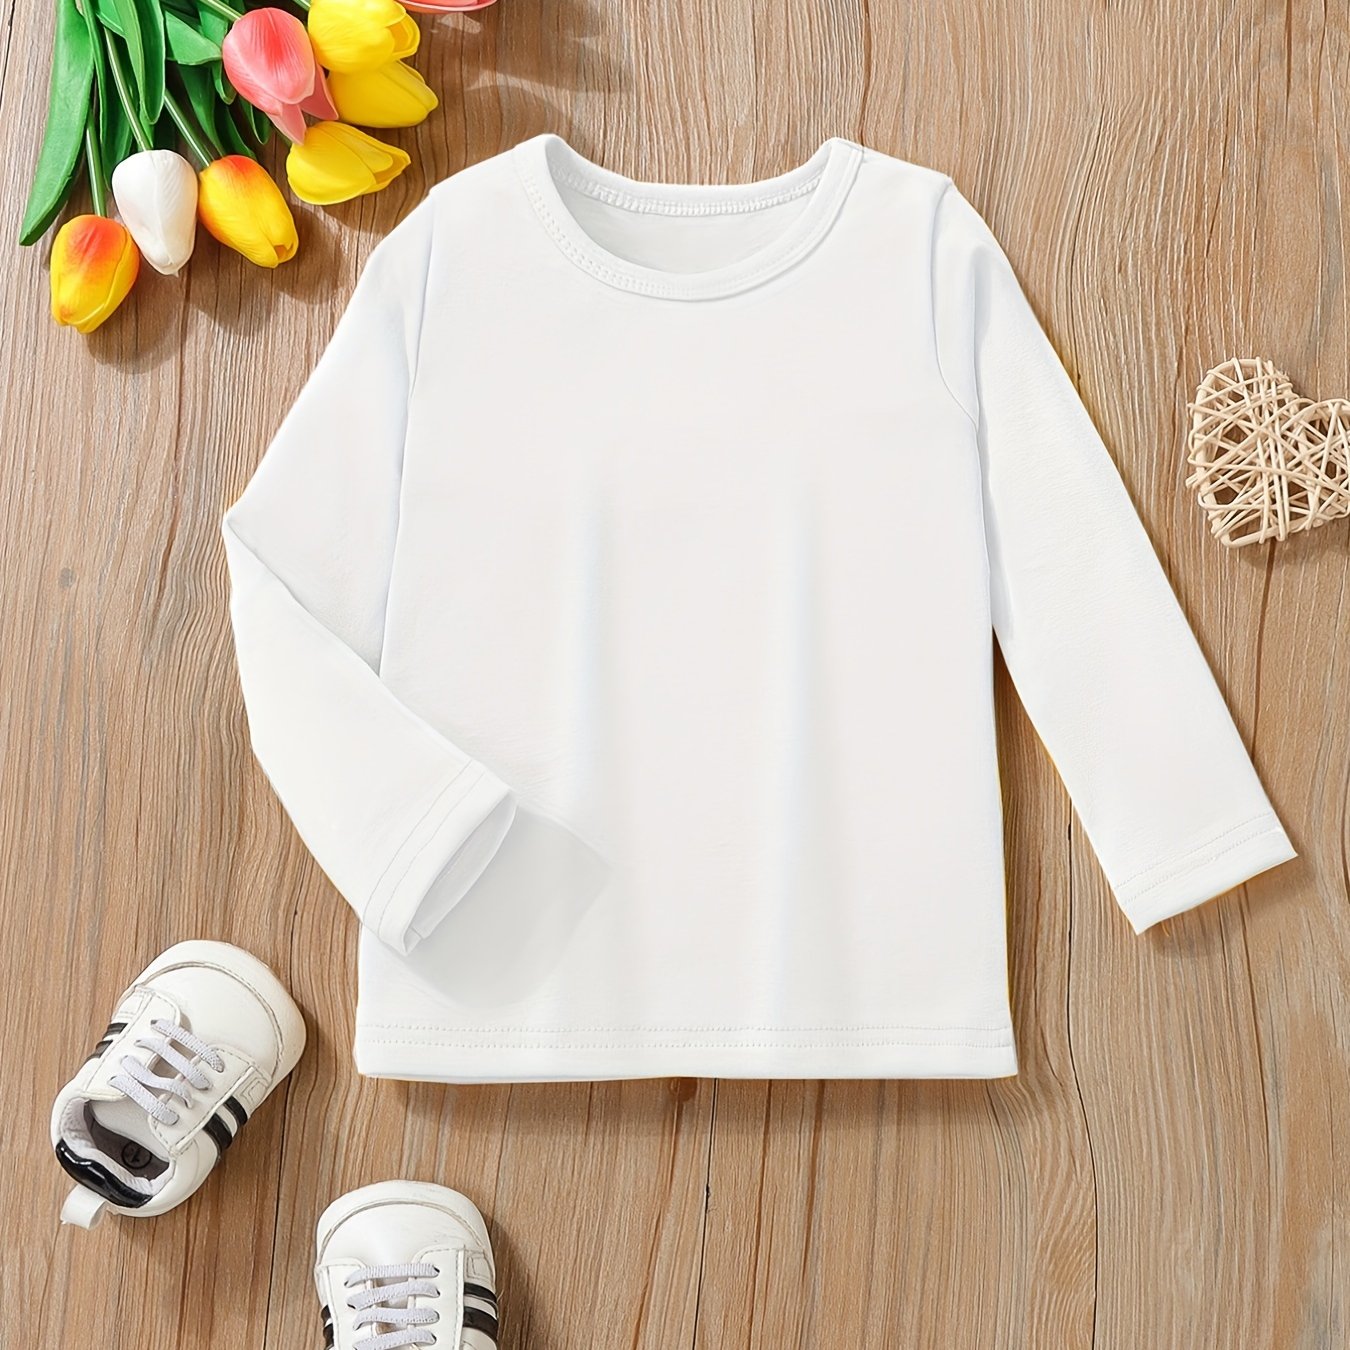  Toddler Baby Boy Girl Basic Solid Plain Organic Cotton T Shirts  Tops Long Sleeve Tee Shirt Girls Clothes (A White, 1-2 Years): Clothing,  Shoes & Jewelry